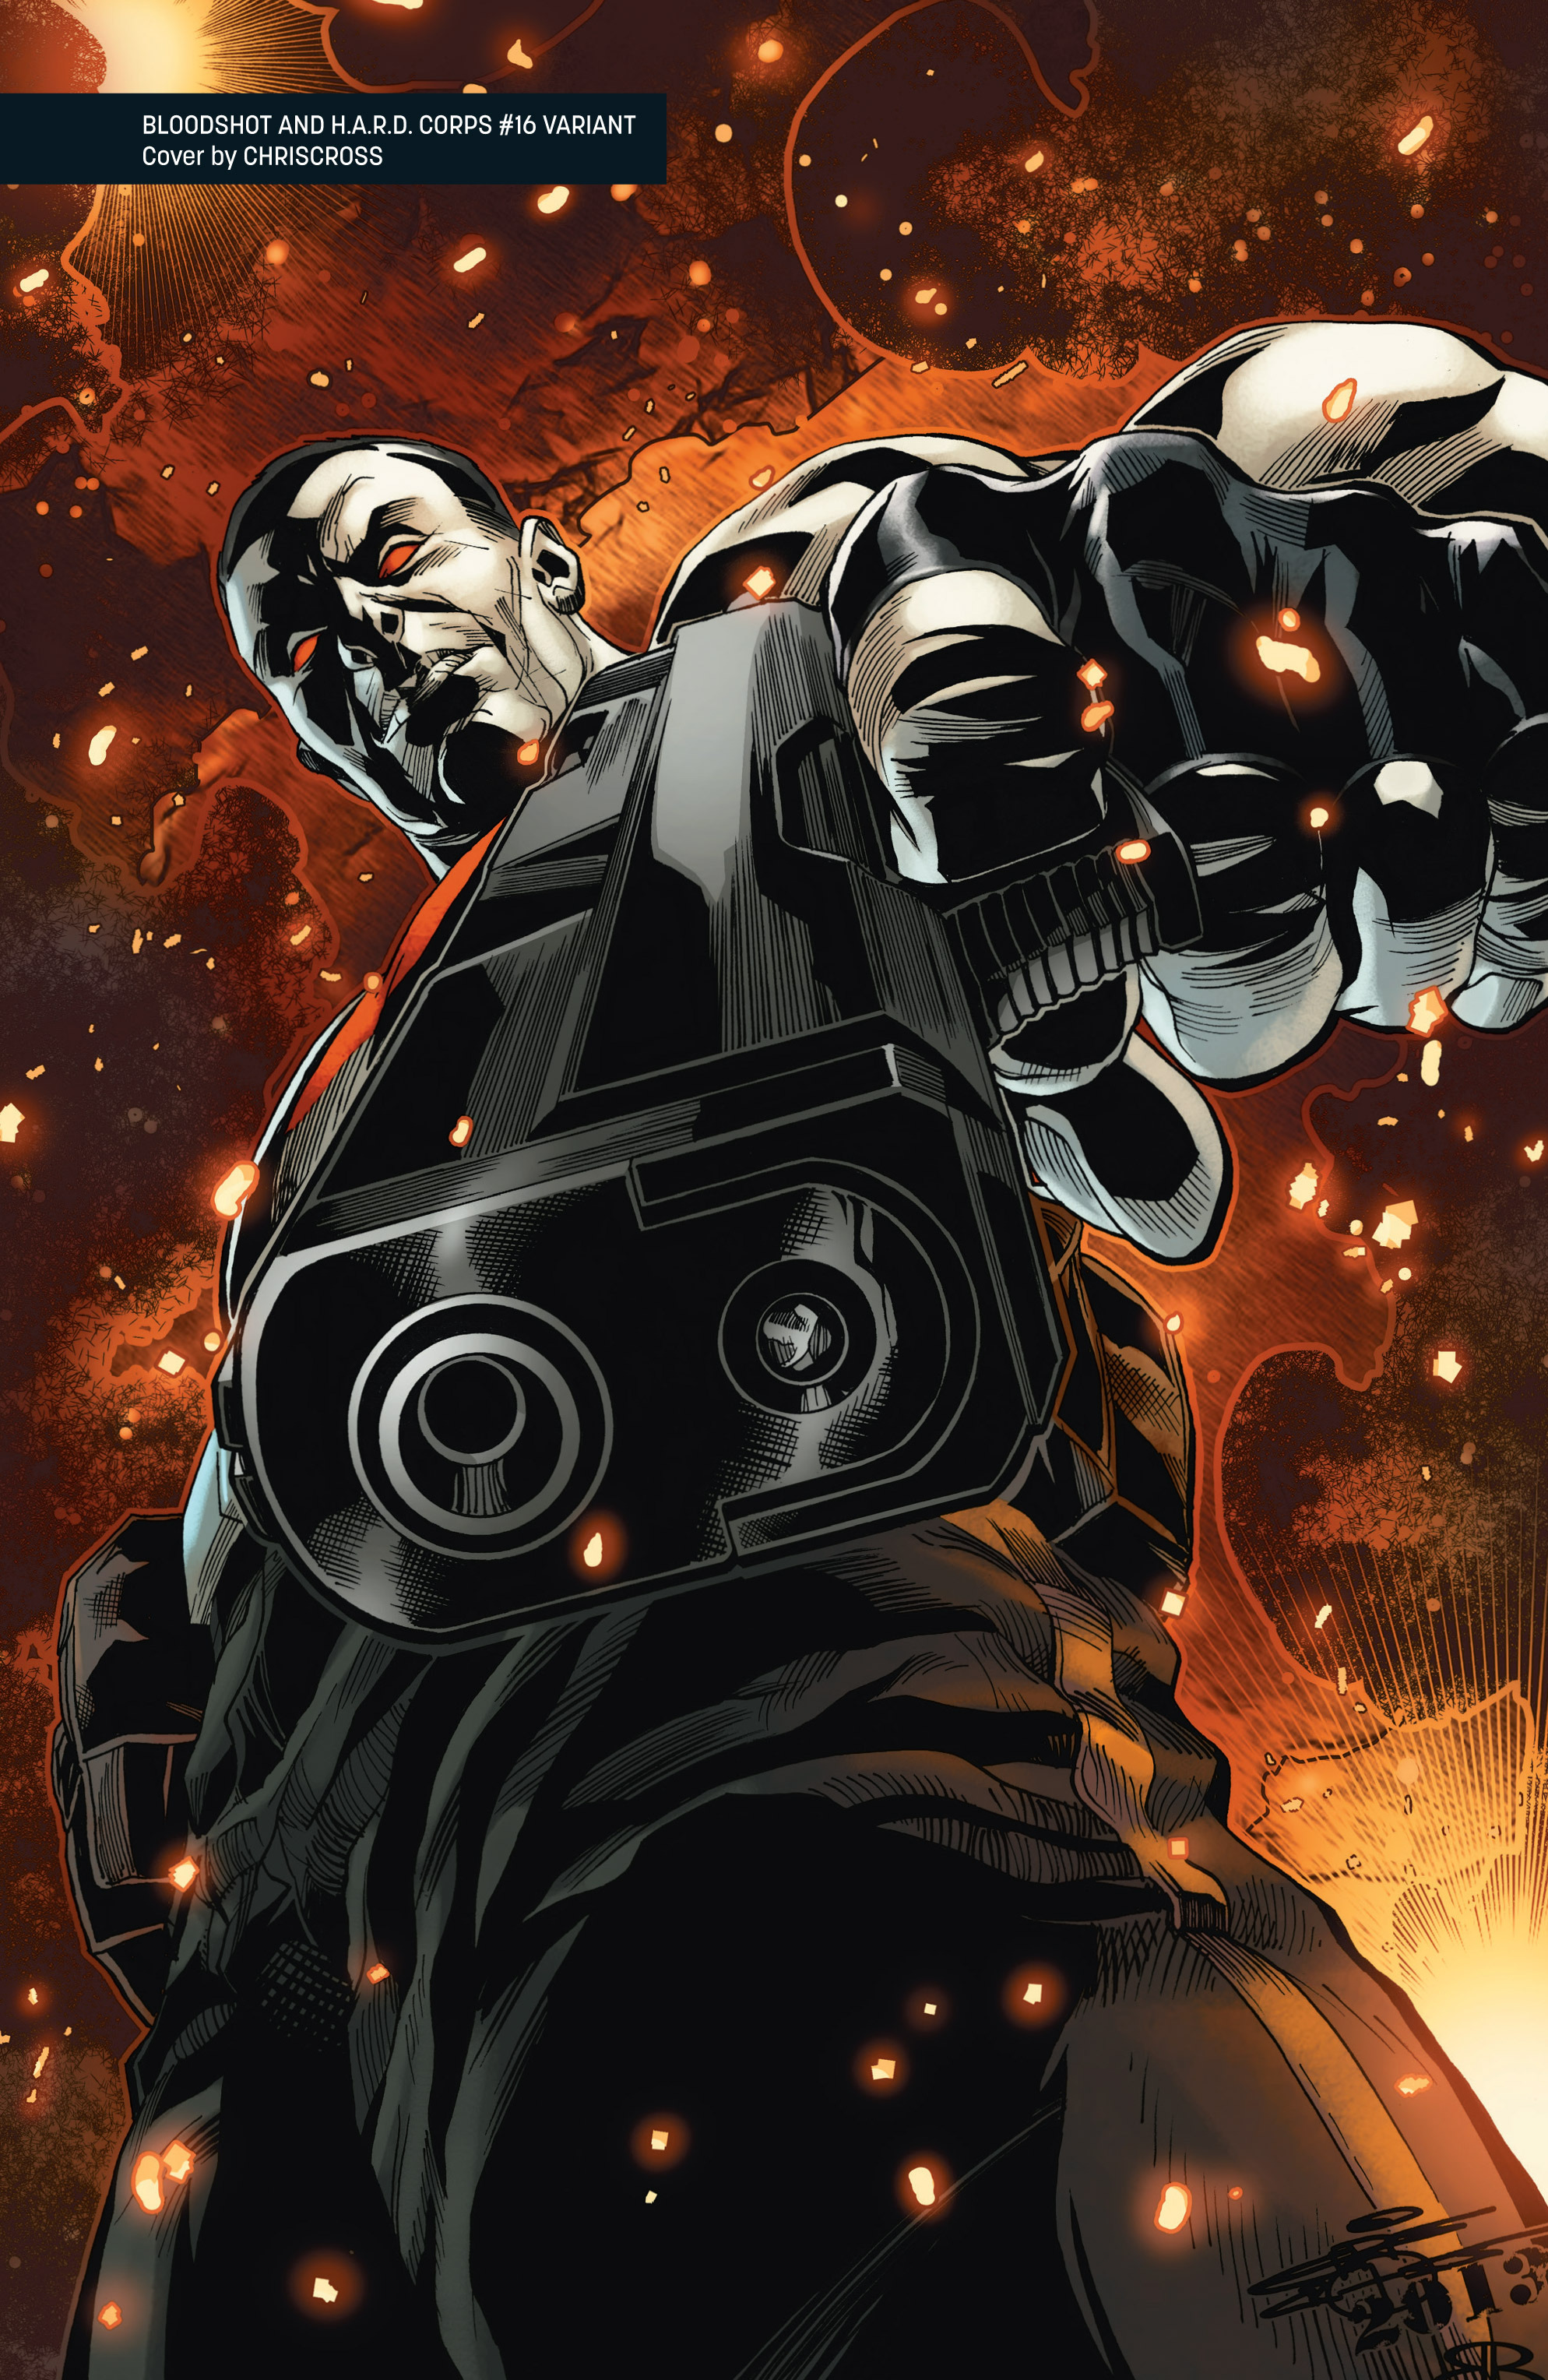 Read online Bloodshot: H.A.R.D. Corps comic -  Issue # Full - 125